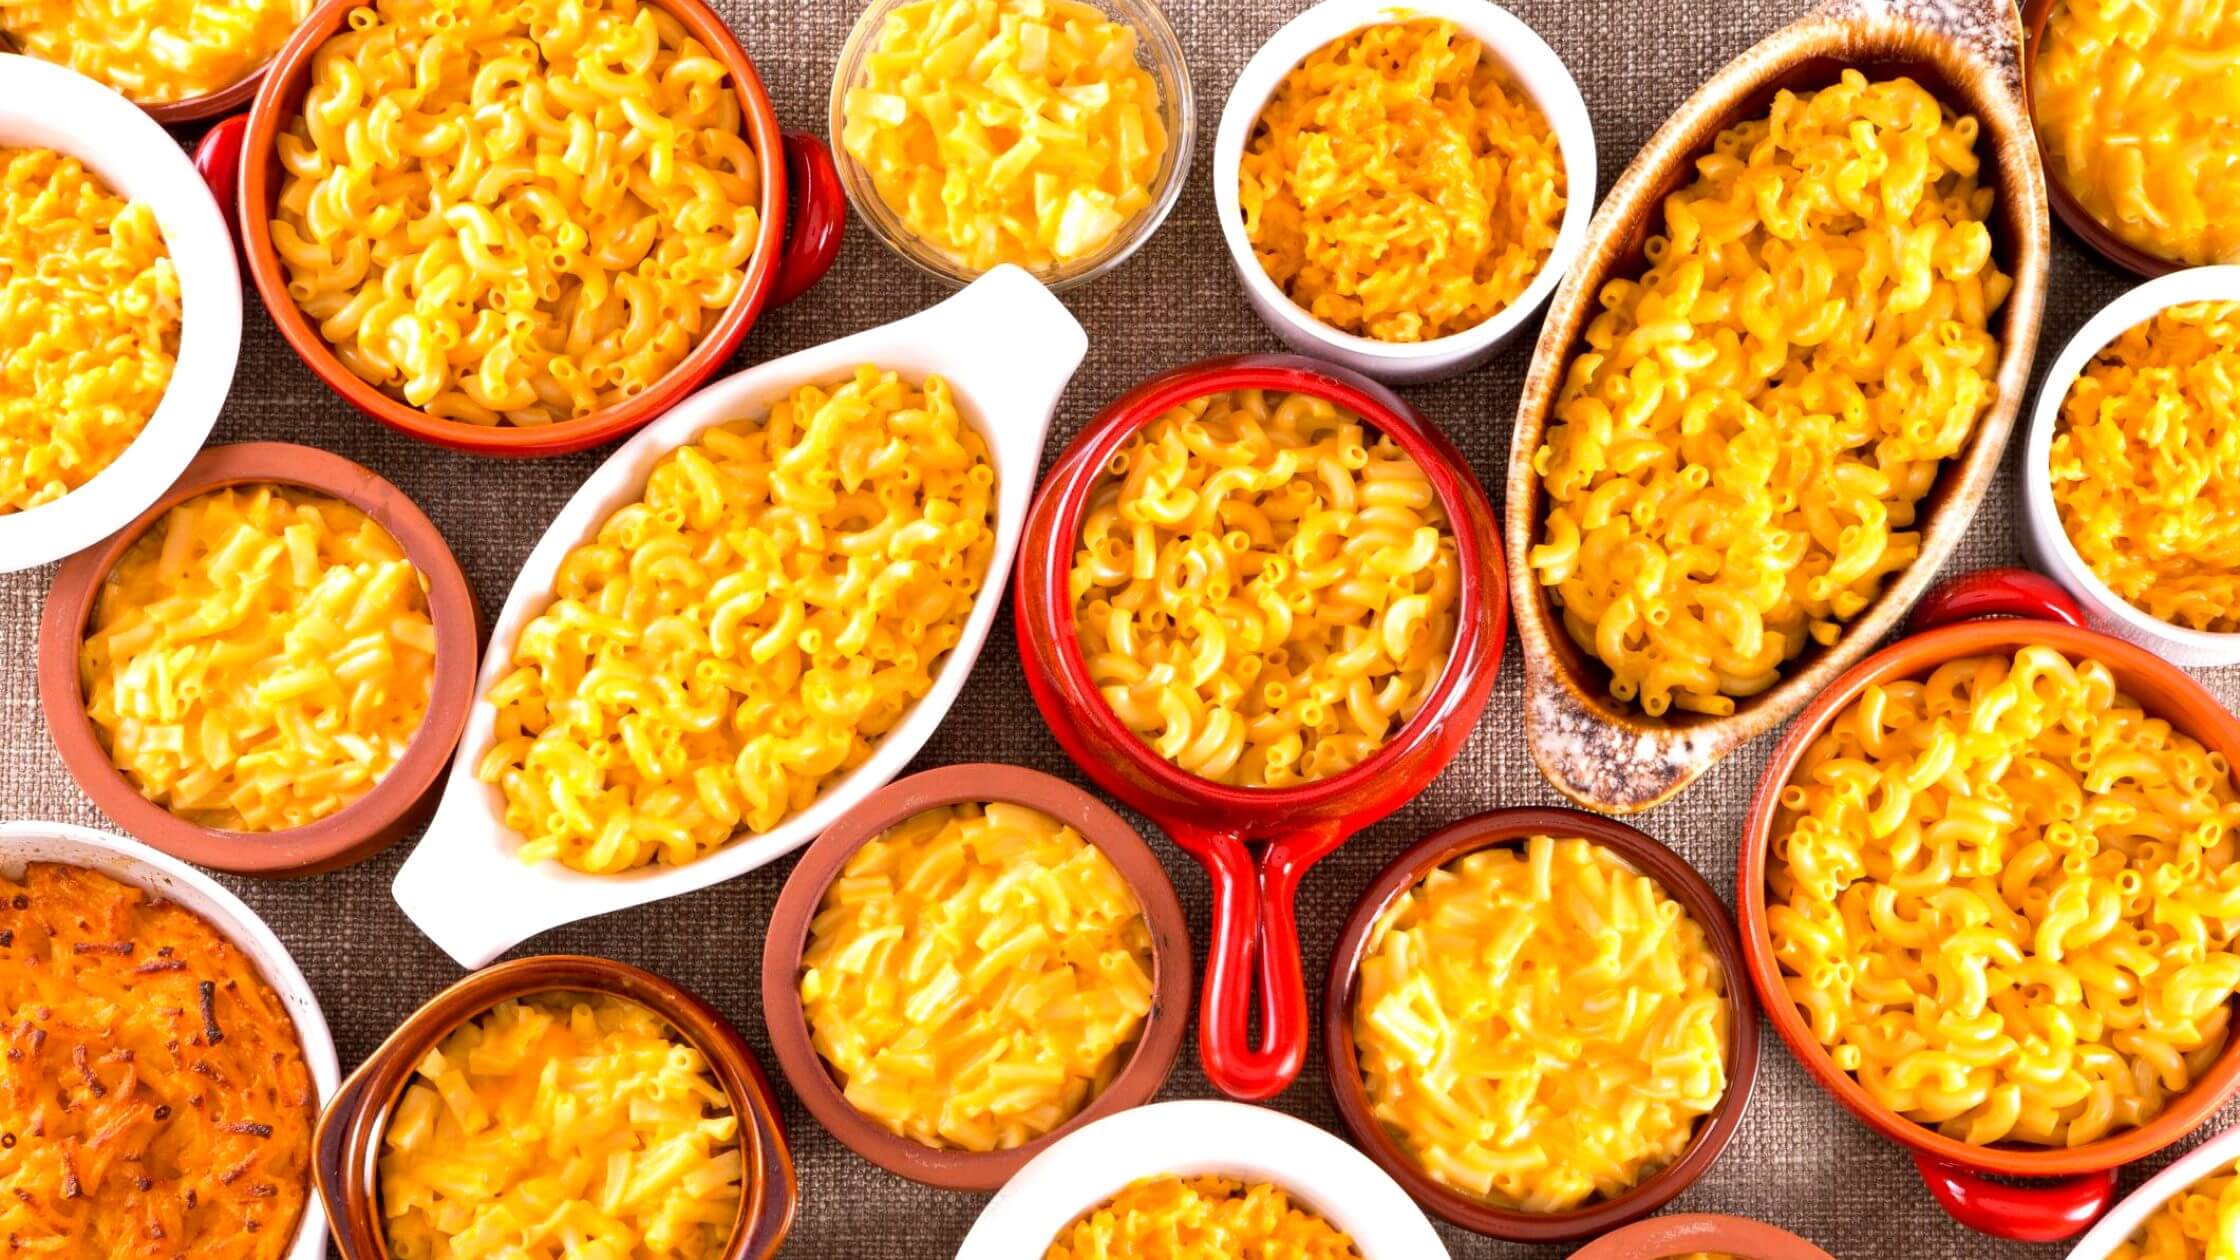 Mac-And-Cheese-The-Consideration-For-Weight-Loss